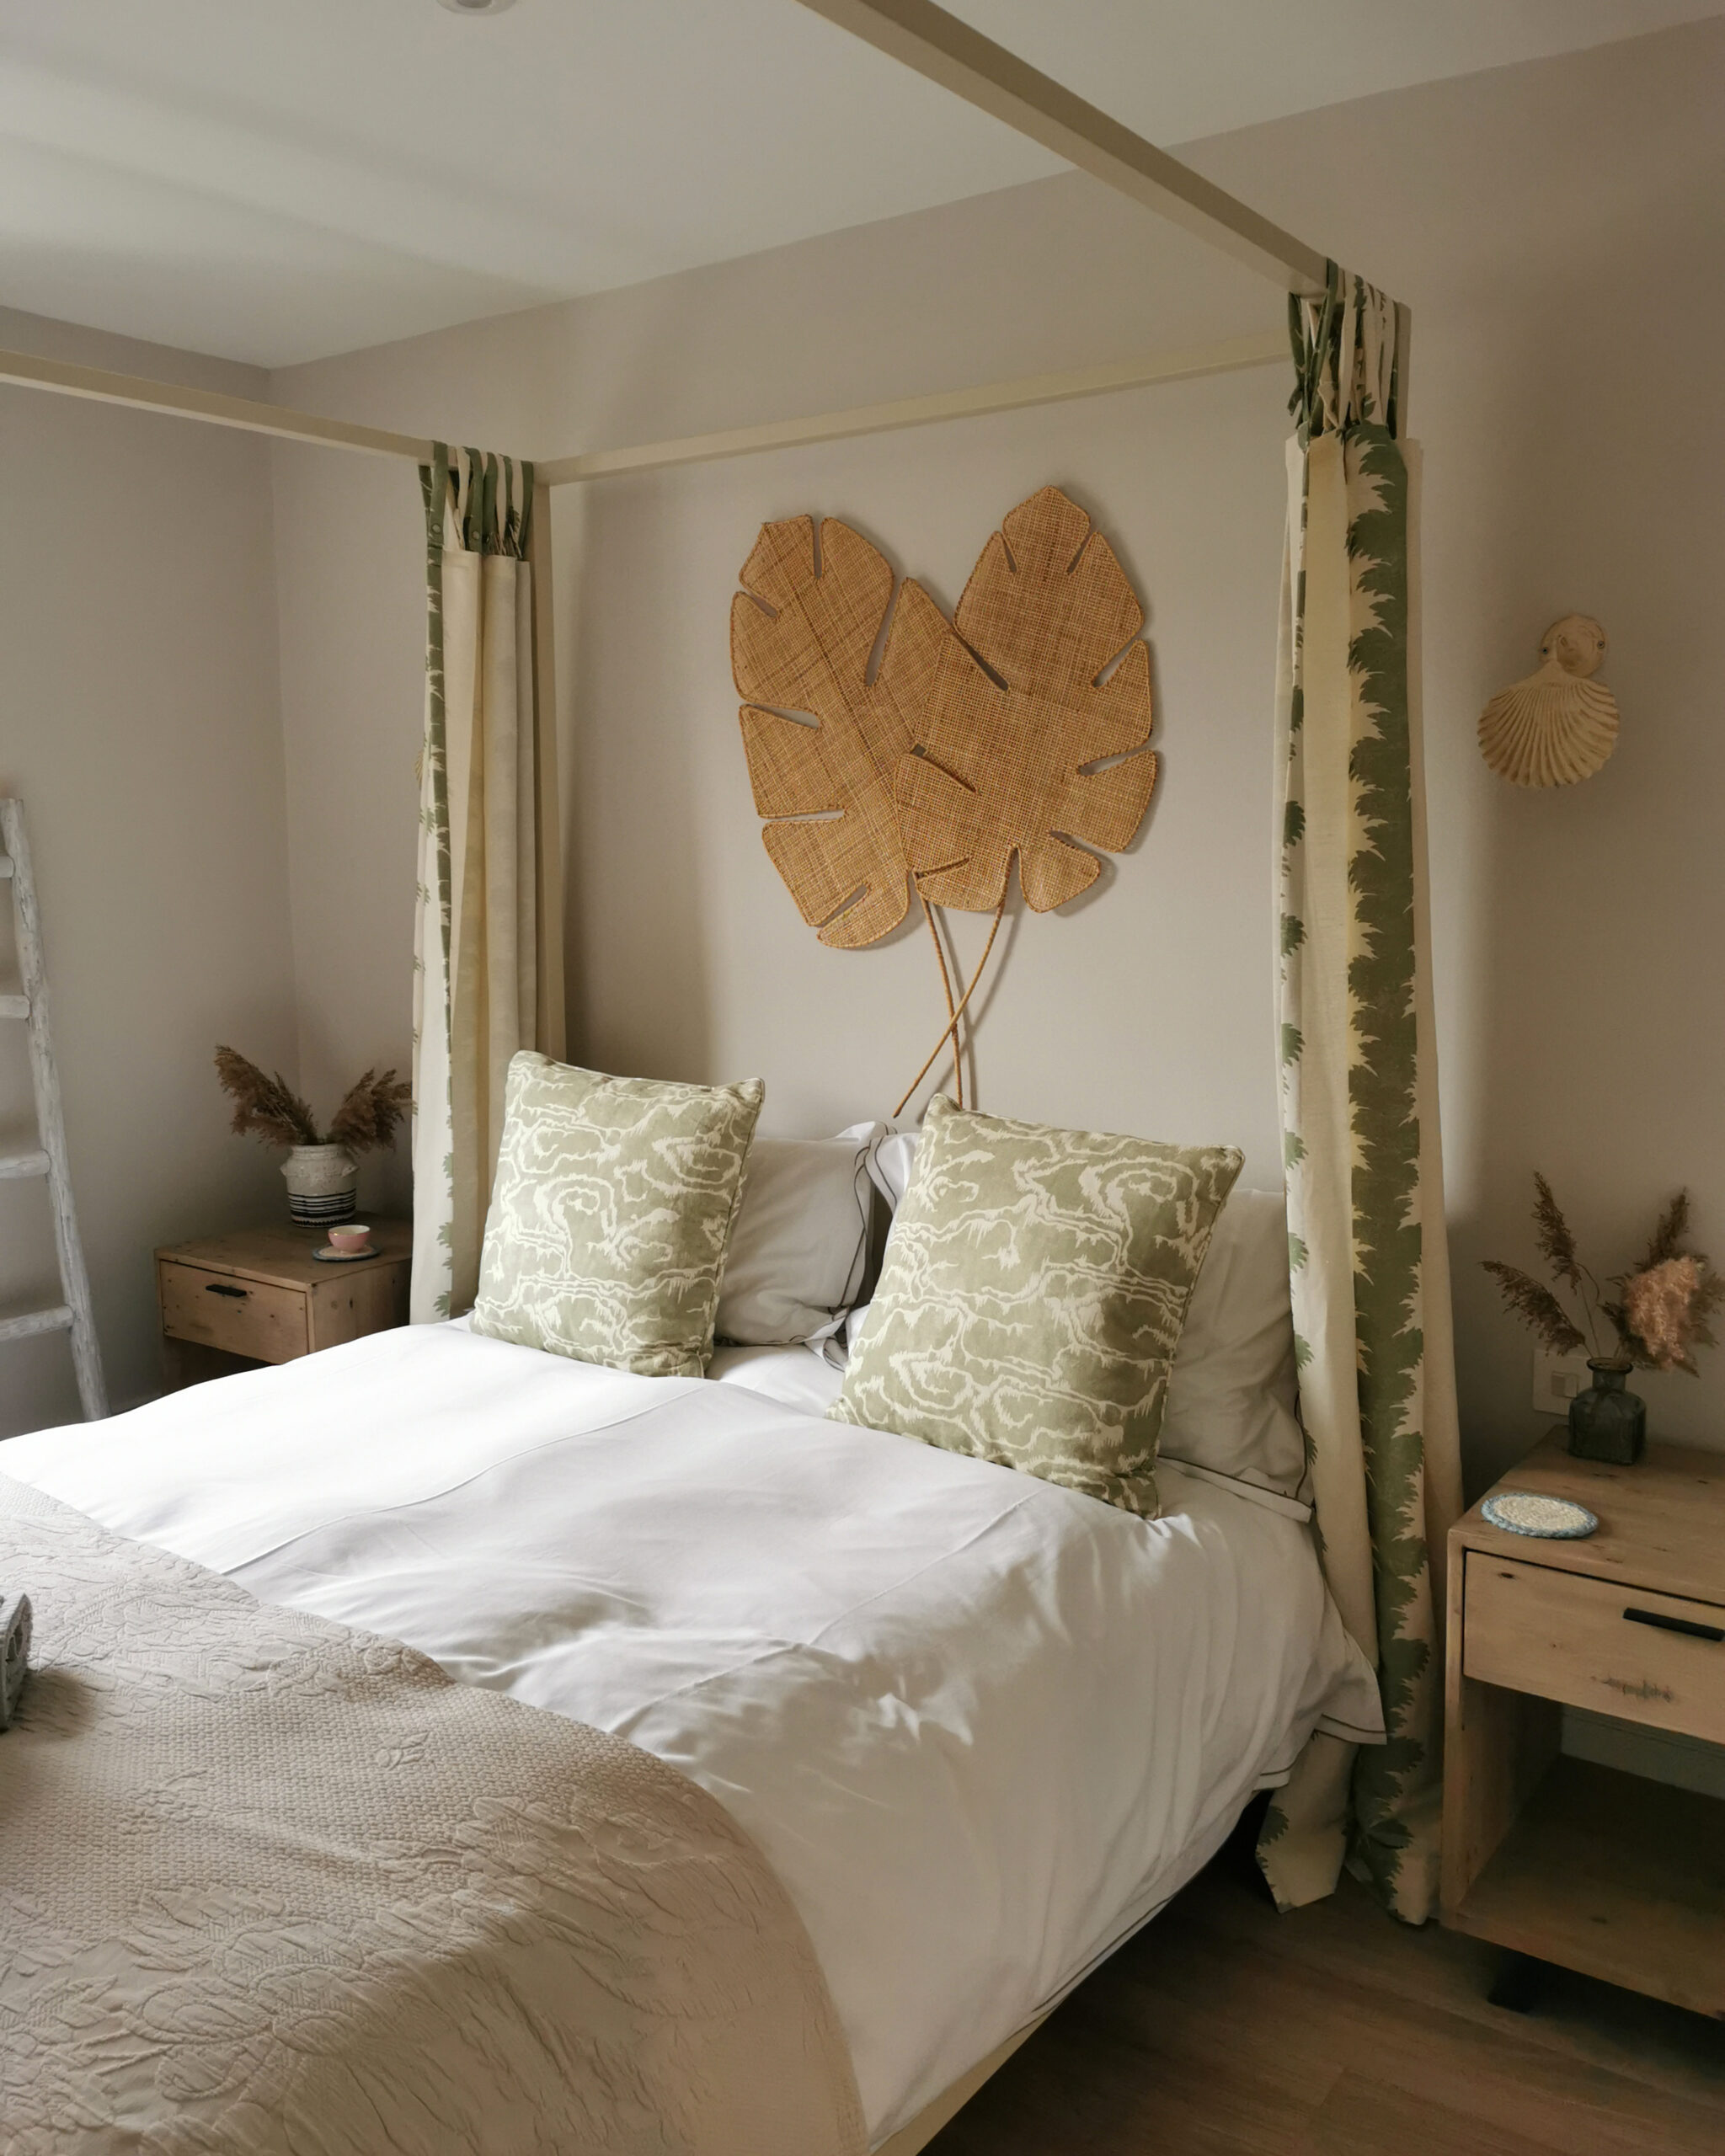 The Shell House In Bournemouth, the Shell house, Self-Catering house, Luxury Self-Catering, Family-Friendly, Seaside break, Family-Friendly, Holiday Home, the Frenchie Mummy, The Shell House Review, Family staycation